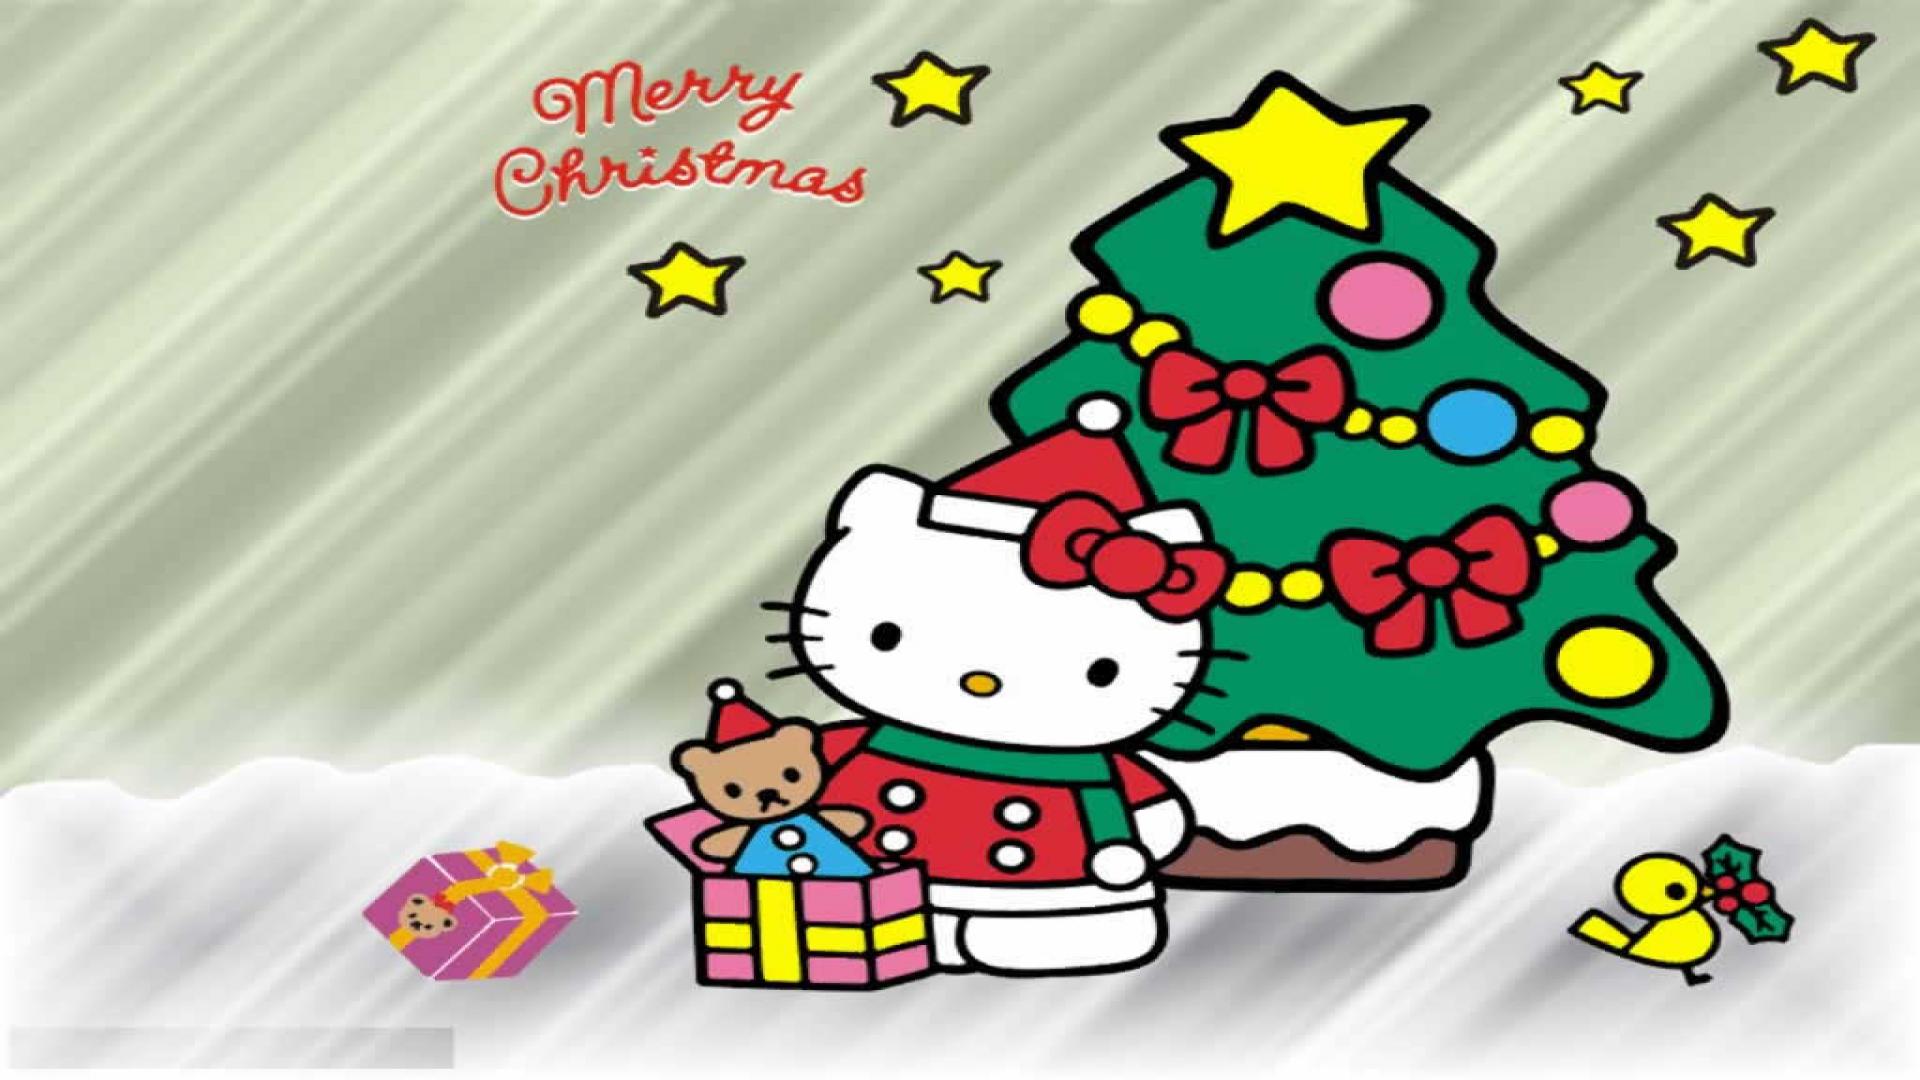 HD Wallpaper Hello Kitty With Kinds Of Gifts Under The